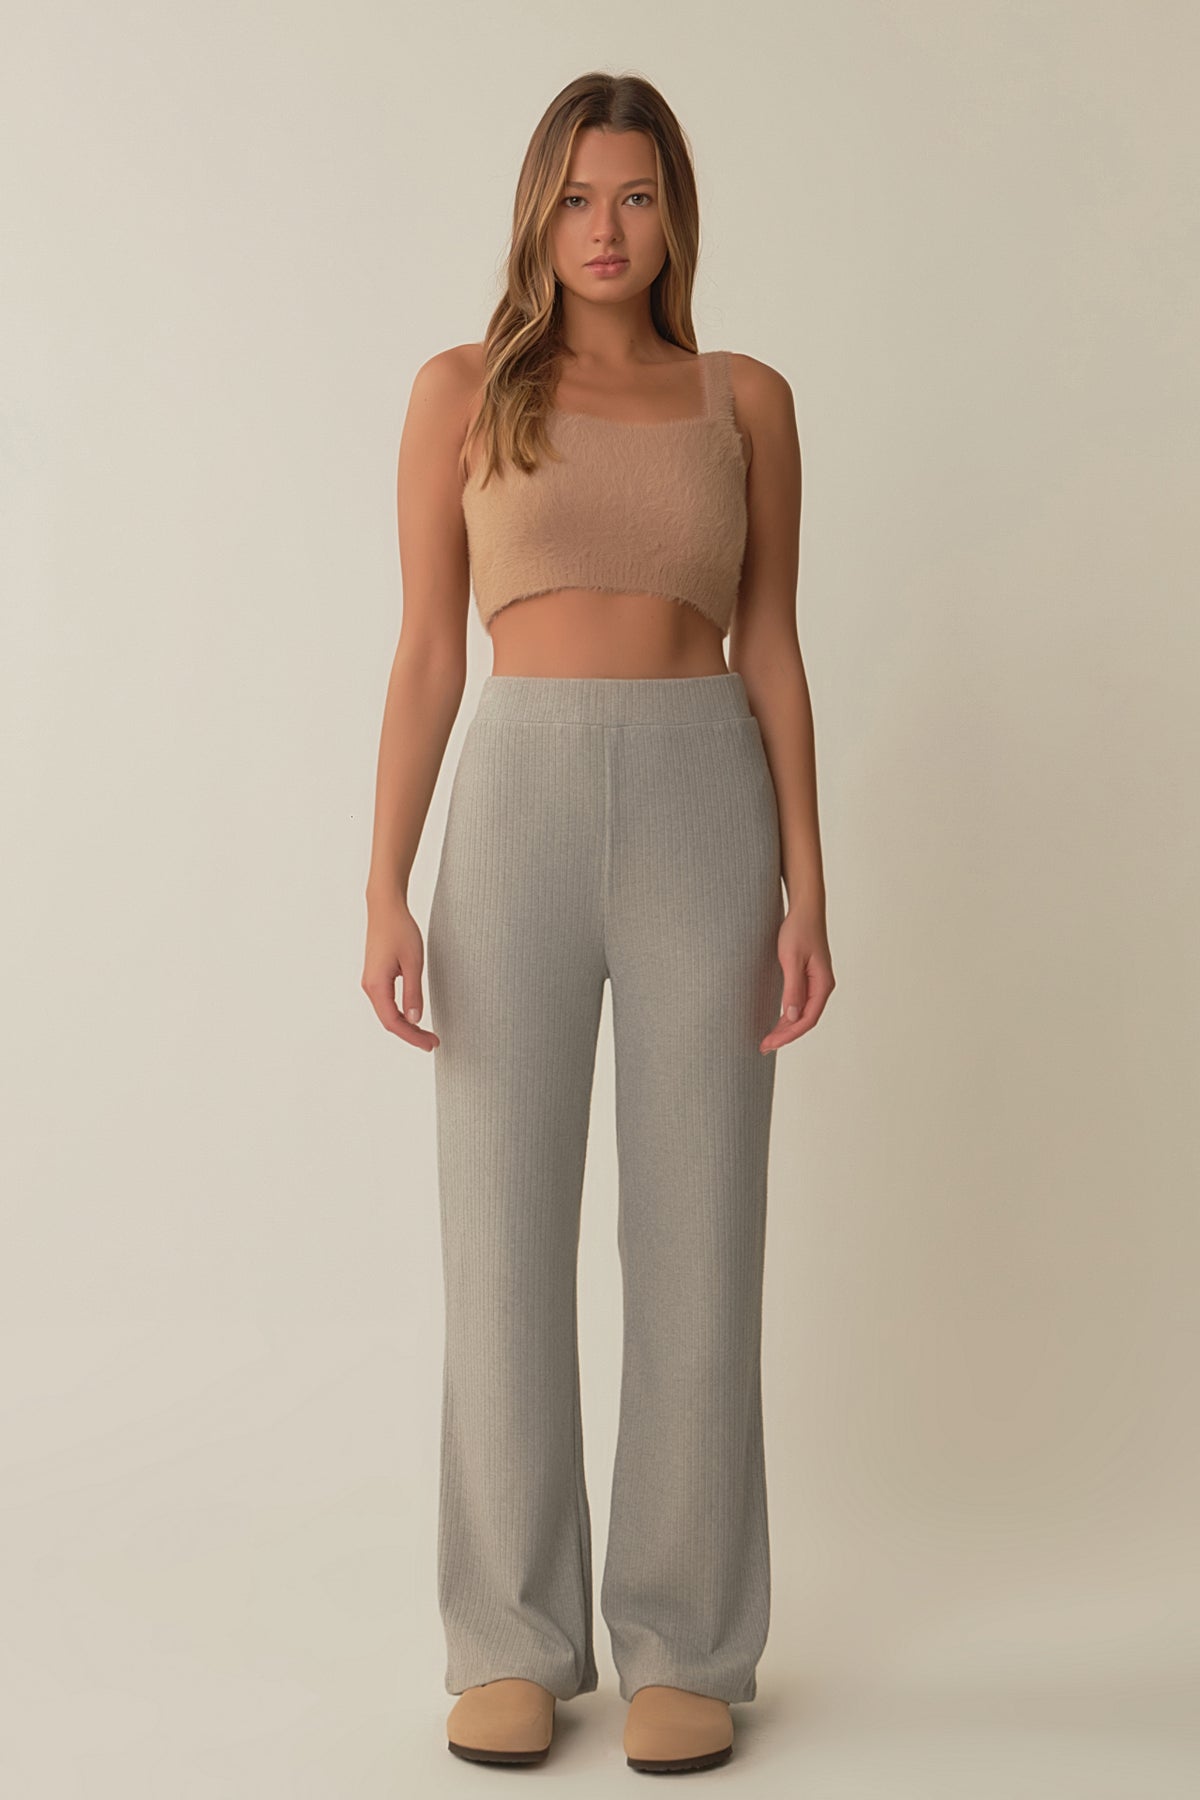 GREY LAB - Feather Plush Bralette Top - TOPS available at Objectrare